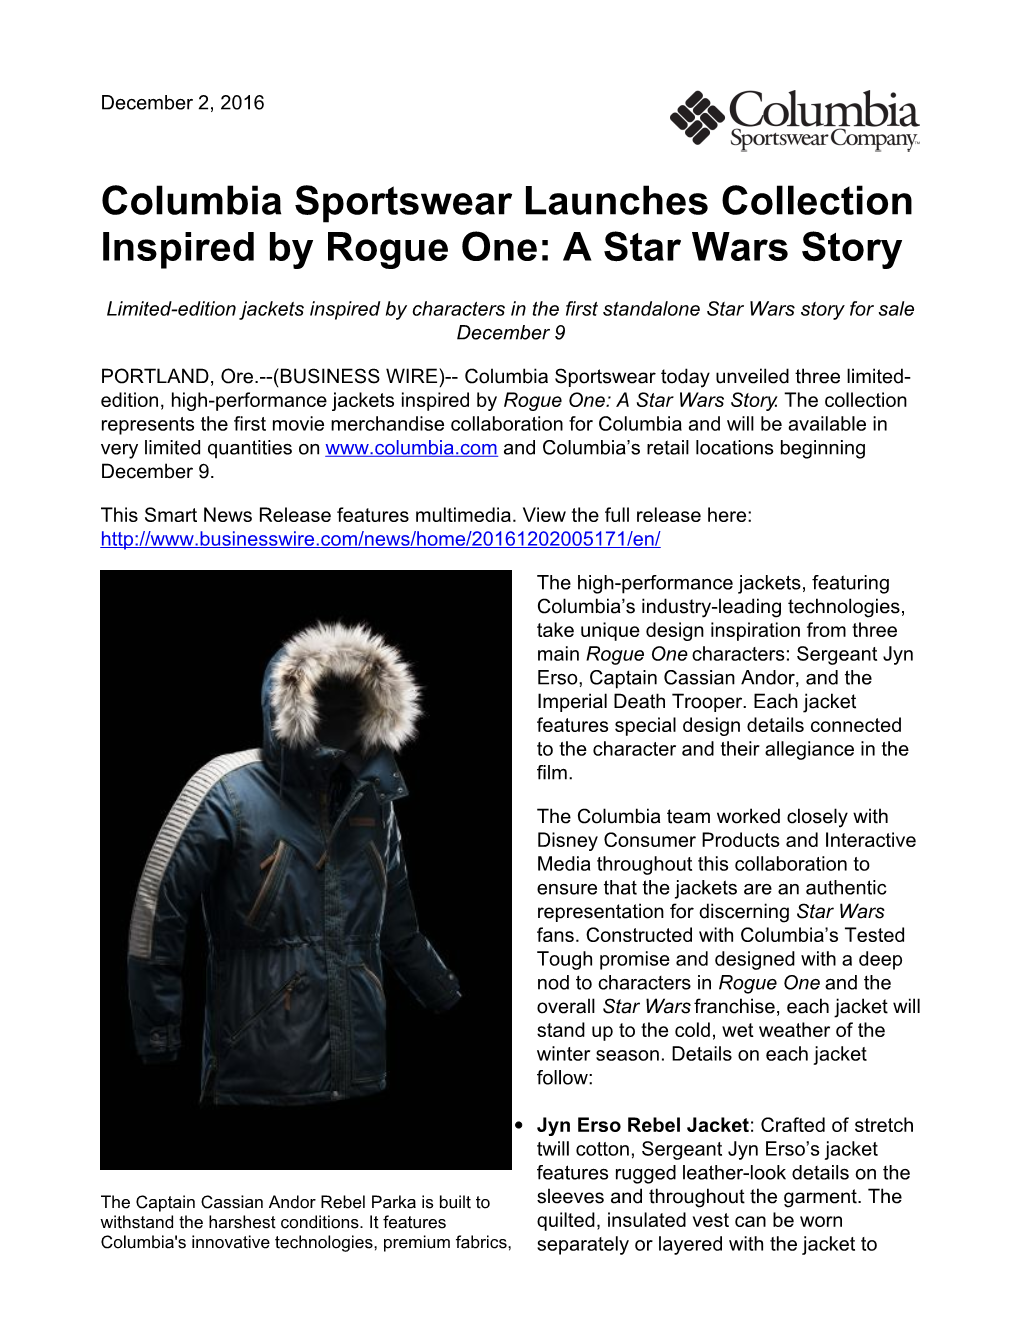 Columbia Sportswear Launches Collection Inspired by Rogue One: a Star Wars Story